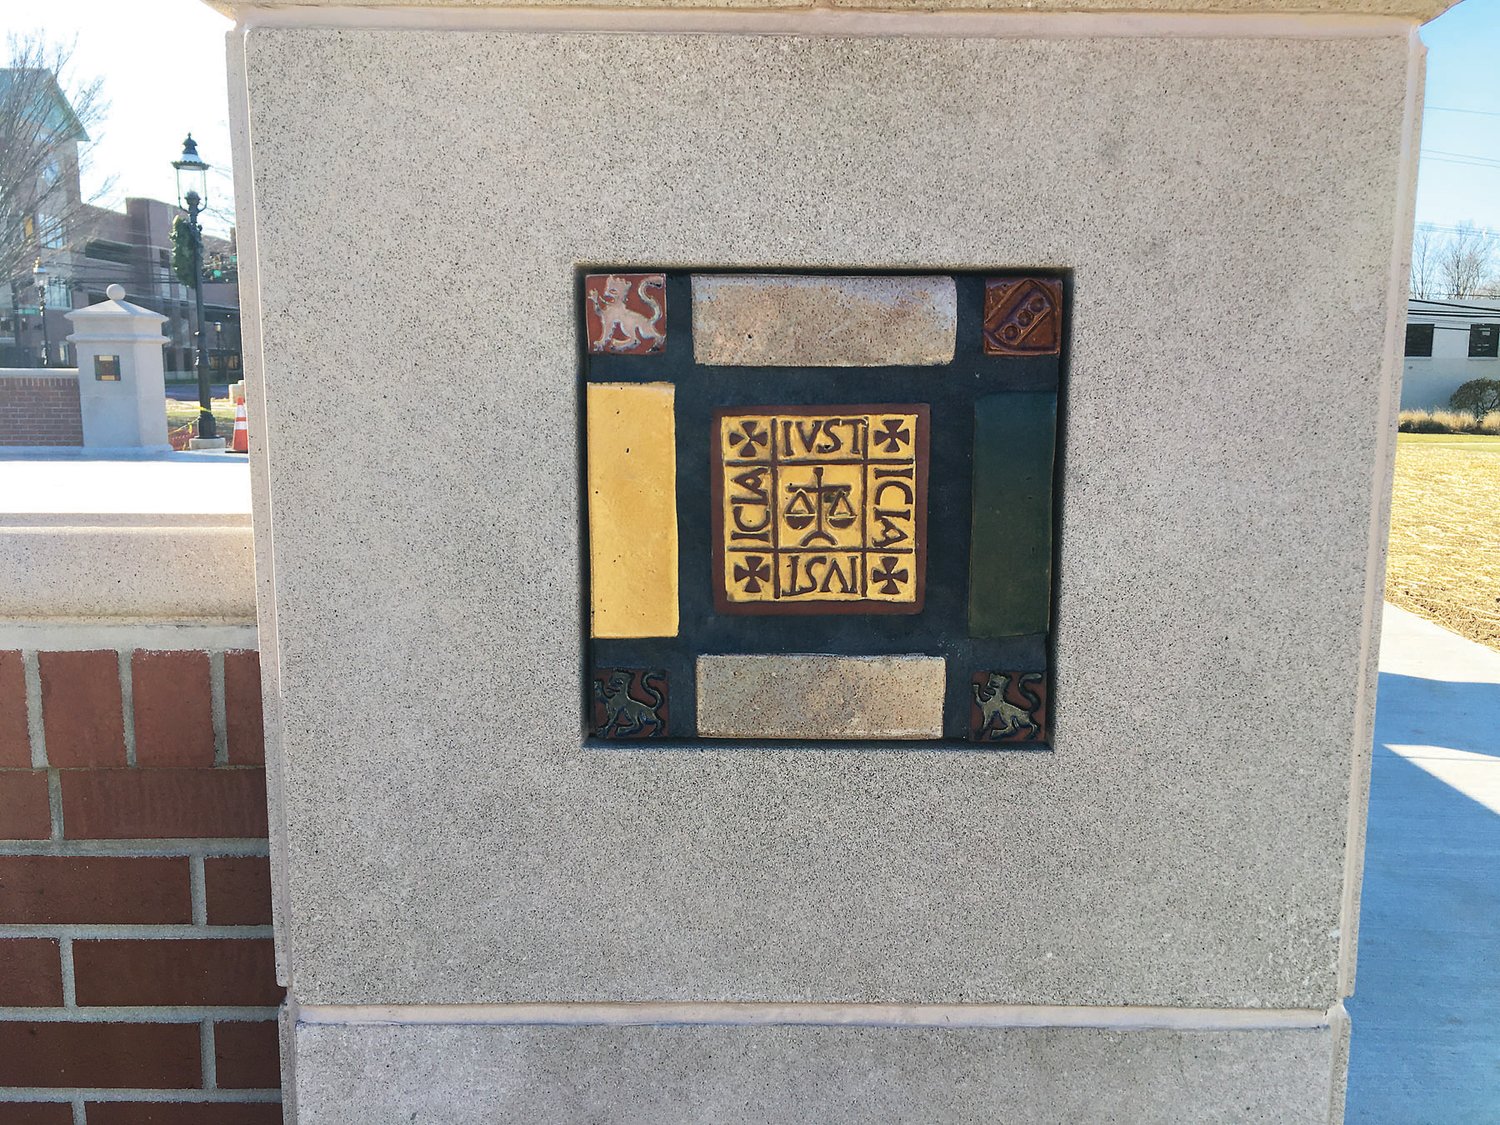 Dozens of Mercer tiles are being added to pillars in Doylestown Borough’s new park, Broad Commons. The striking tiles were created at TileWorks of Bucks County.